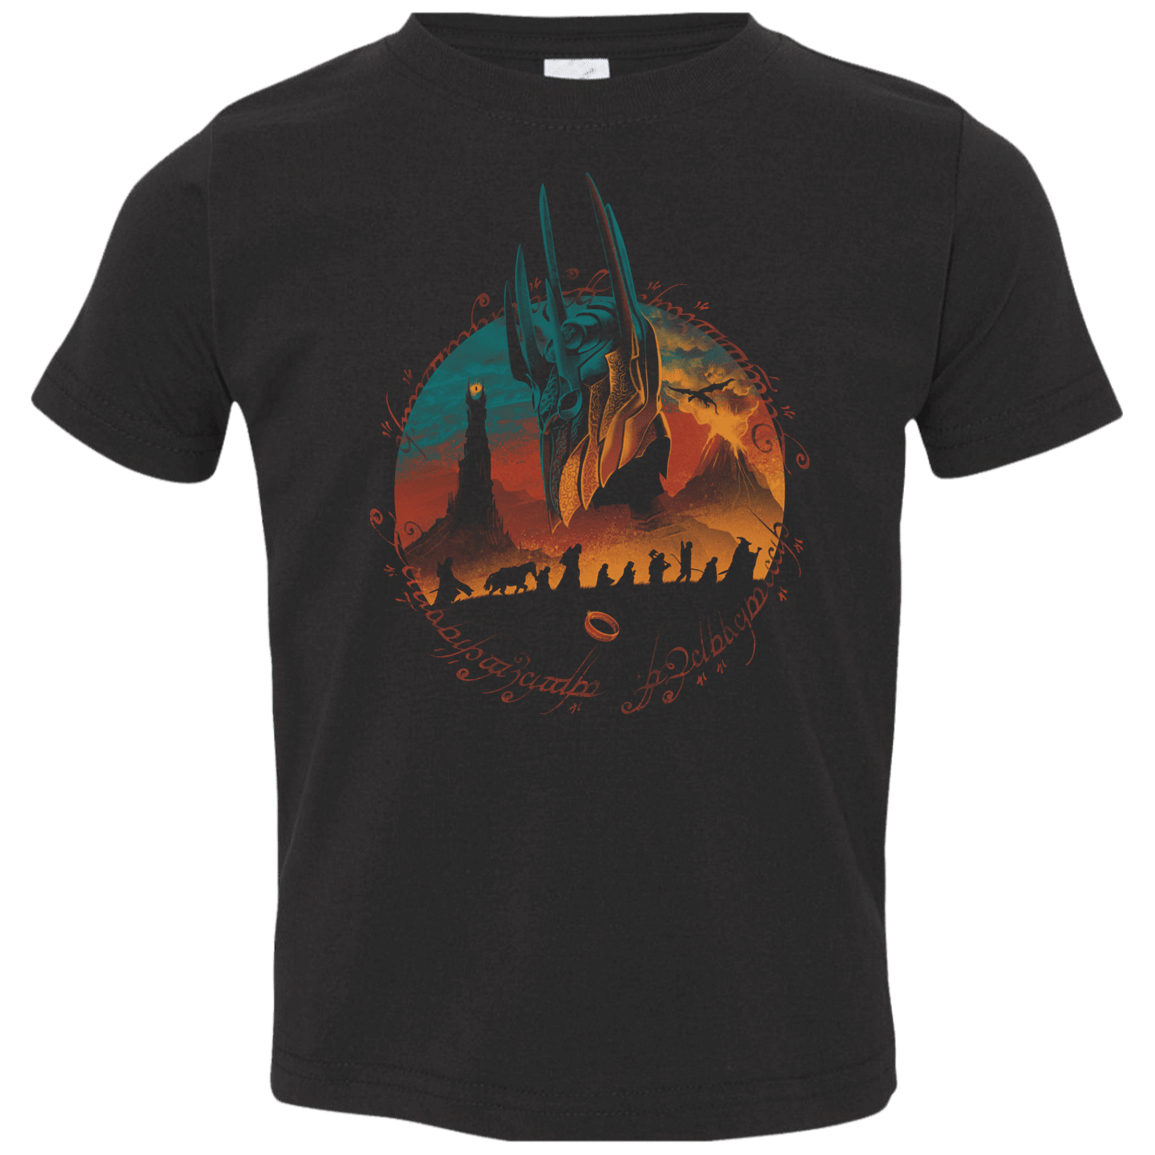 T-Shirts Black / 2T Middle Earth Quest Toddler Premium T-Shirt